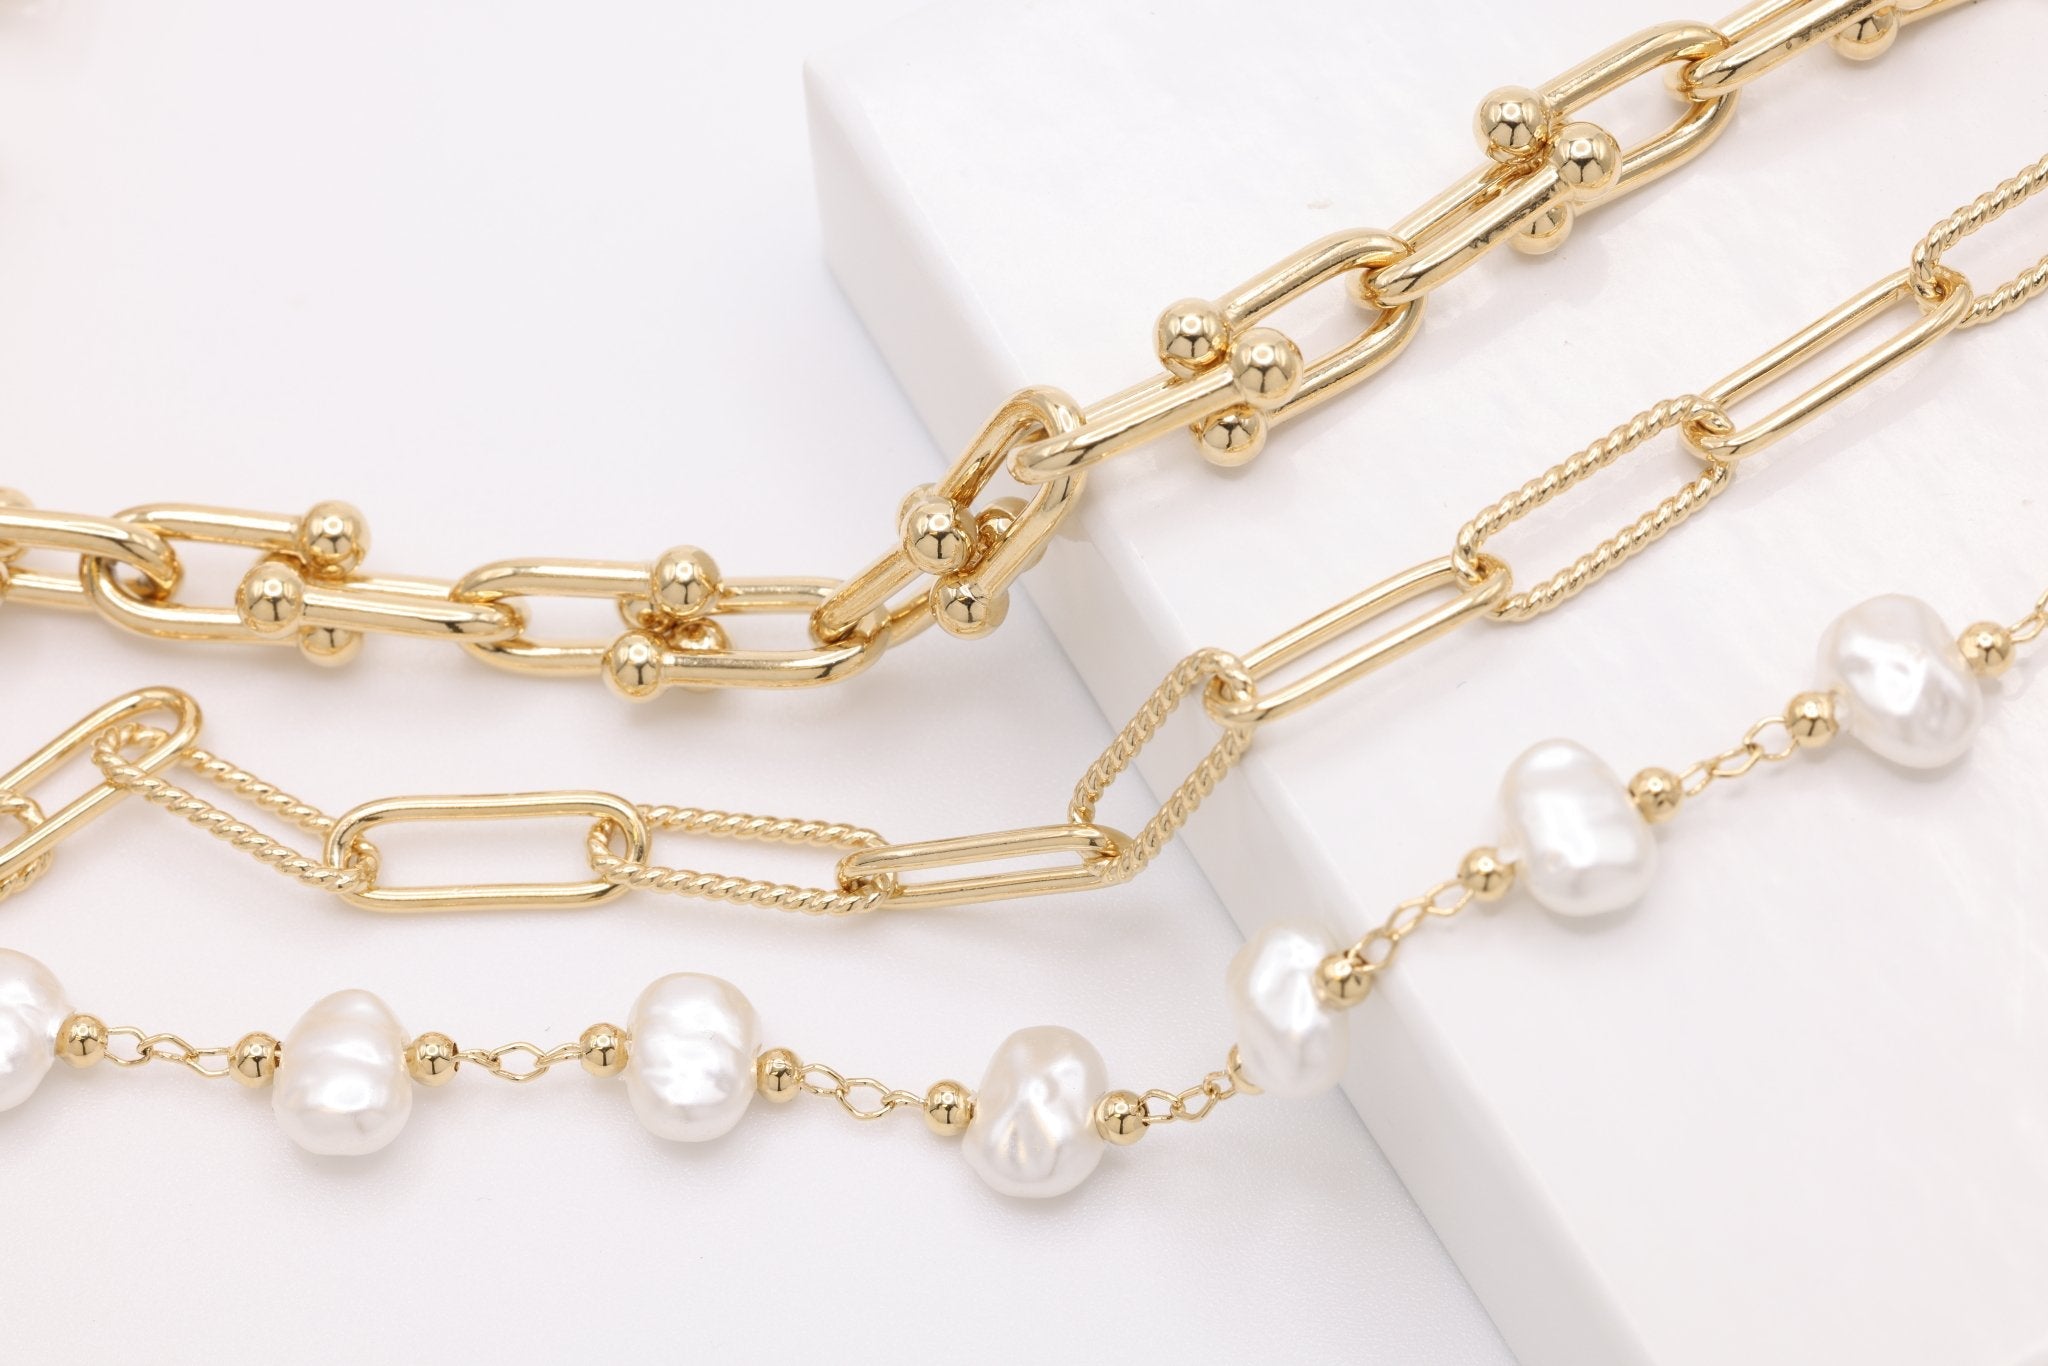 Wholesale Gold Overlay Jewelry Chain - HarperCrown